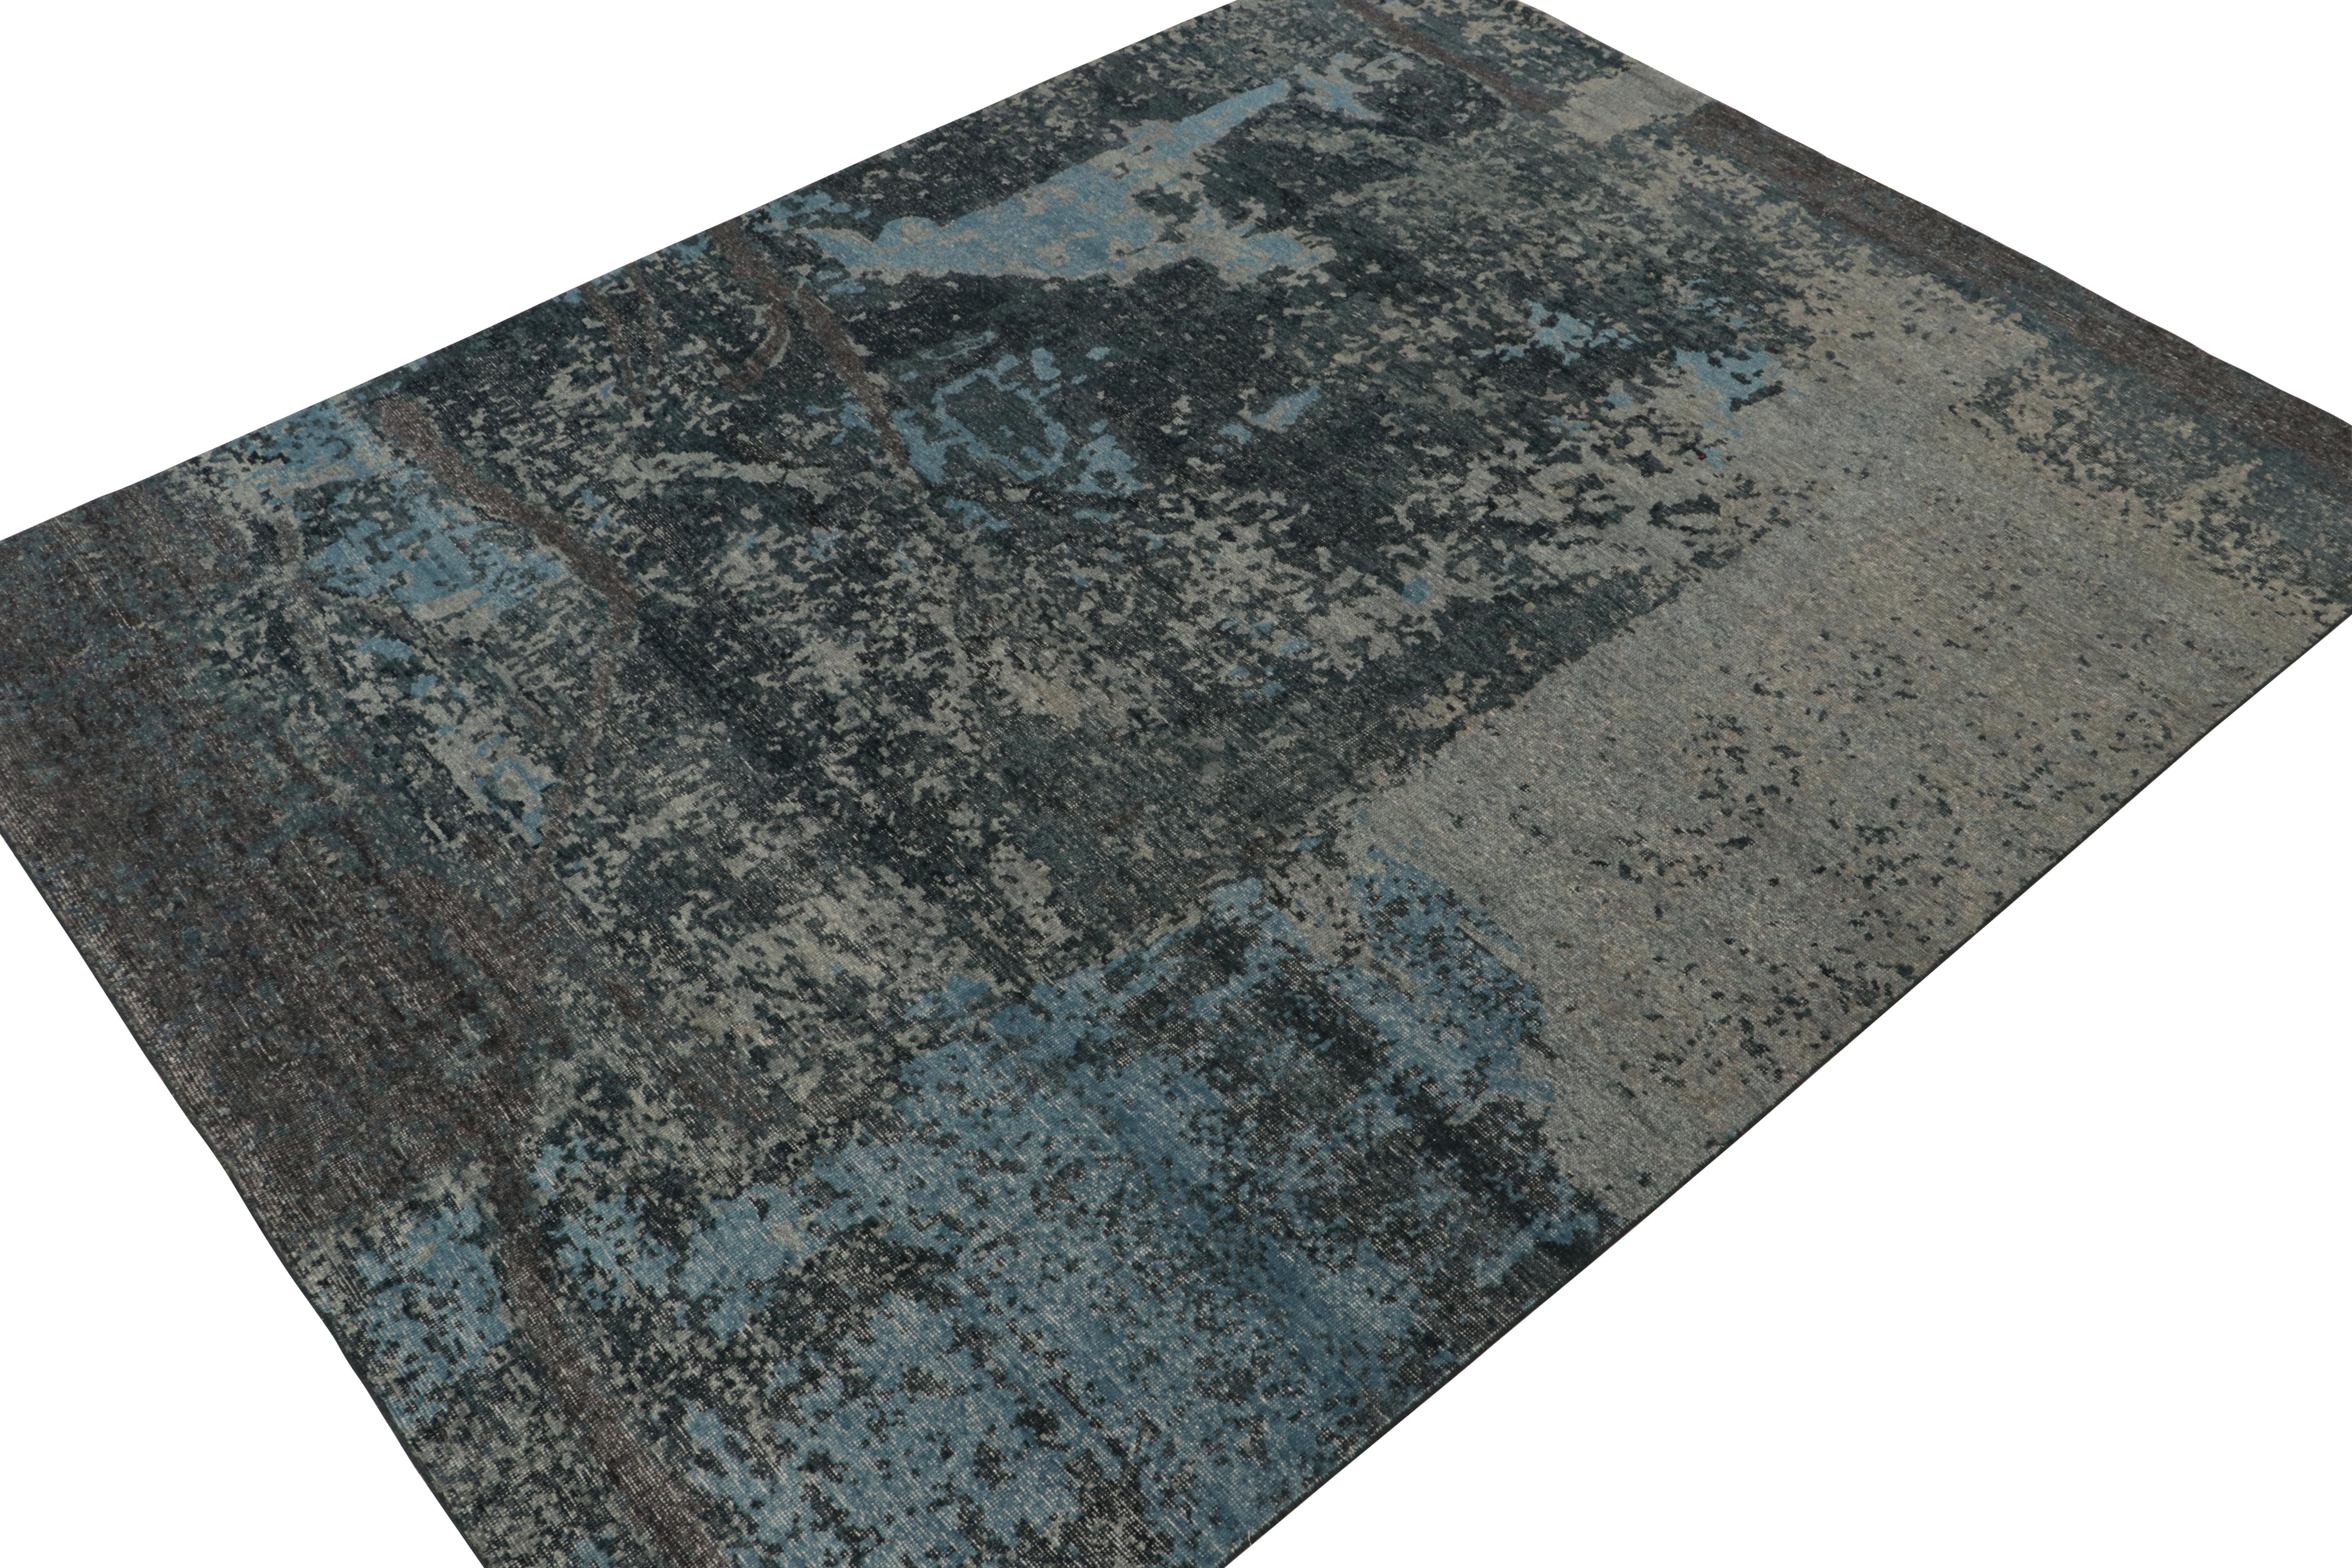 This contemporary 9x12 abstract rug is a new addition to the Homage Collection by Rug & Kilim.

Further On the Design:

Hand-knotted in wool and cotton, this design evokes a fluid play of blue and gray colors with a deft hand for detail. Keen